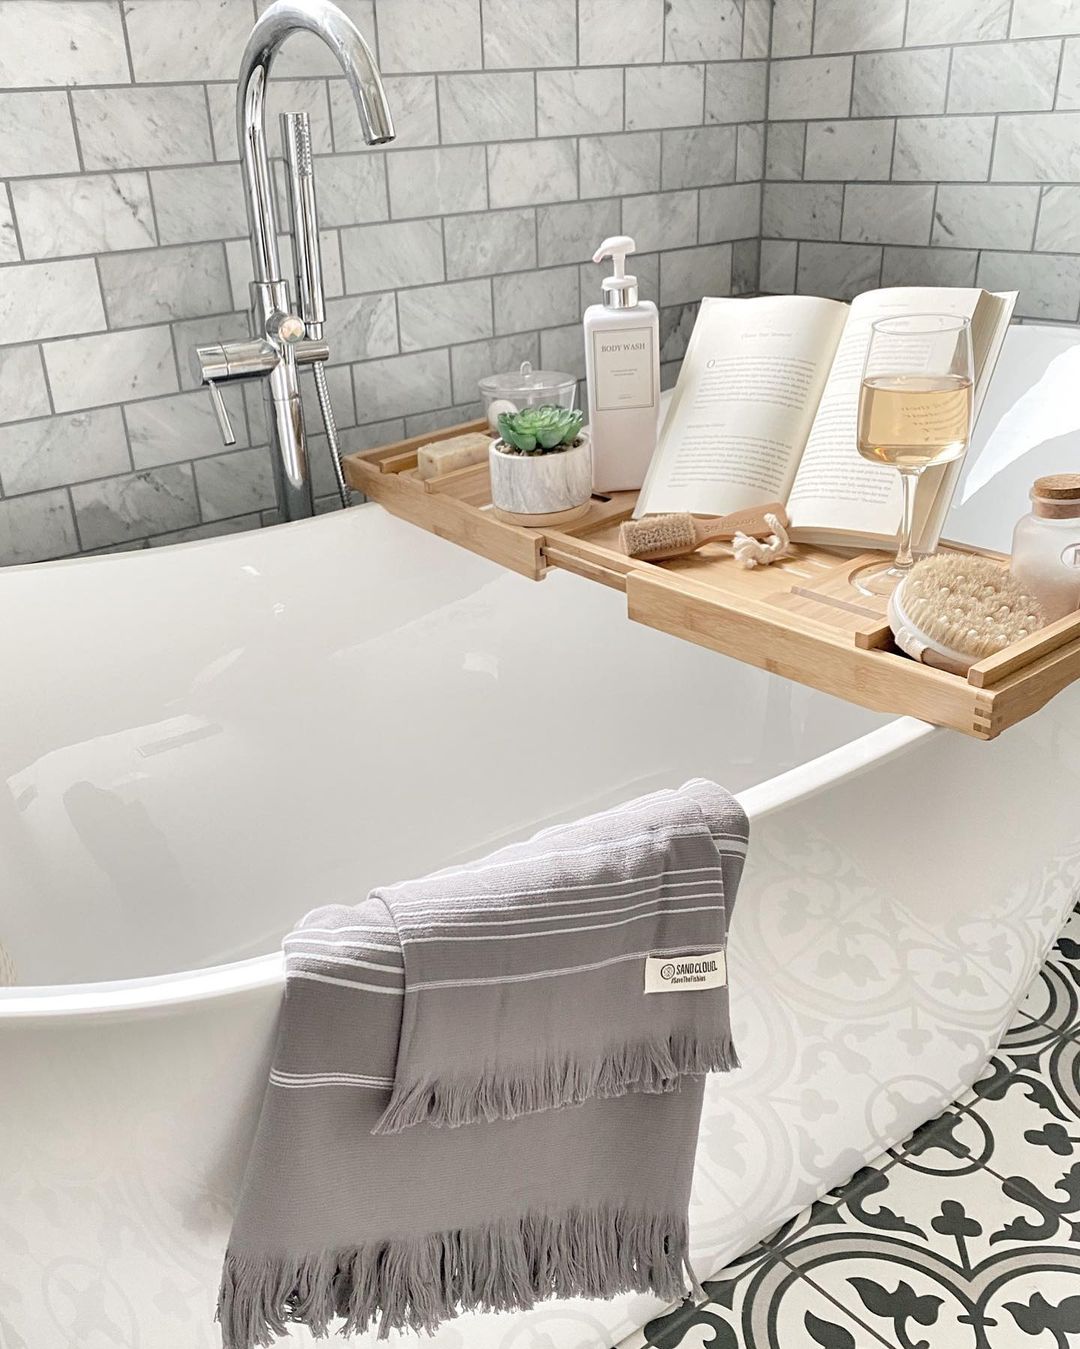 Elevate Bath Time with a Versatile Wooden Tray